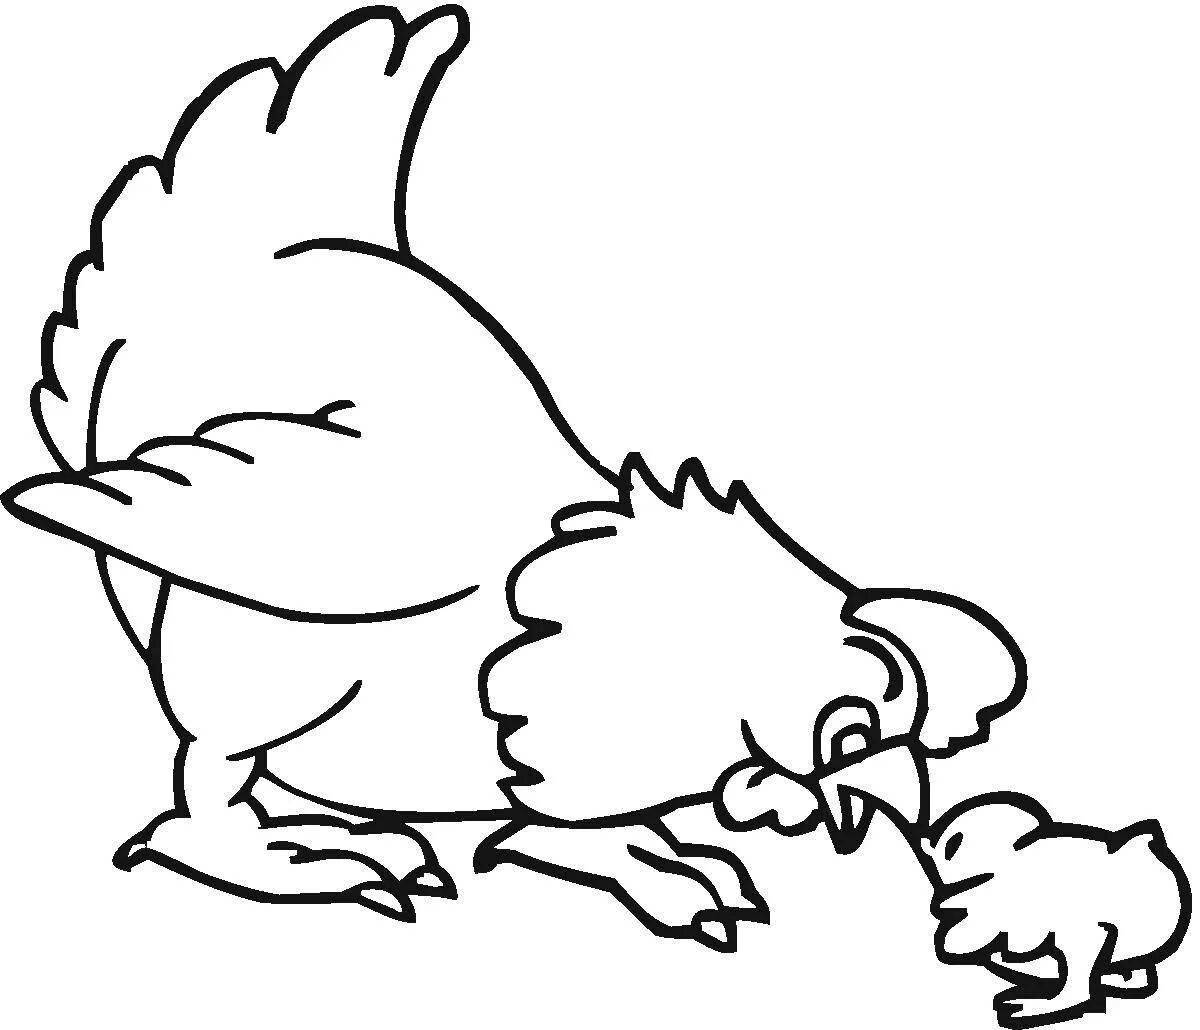 Rampant chickens coloring page